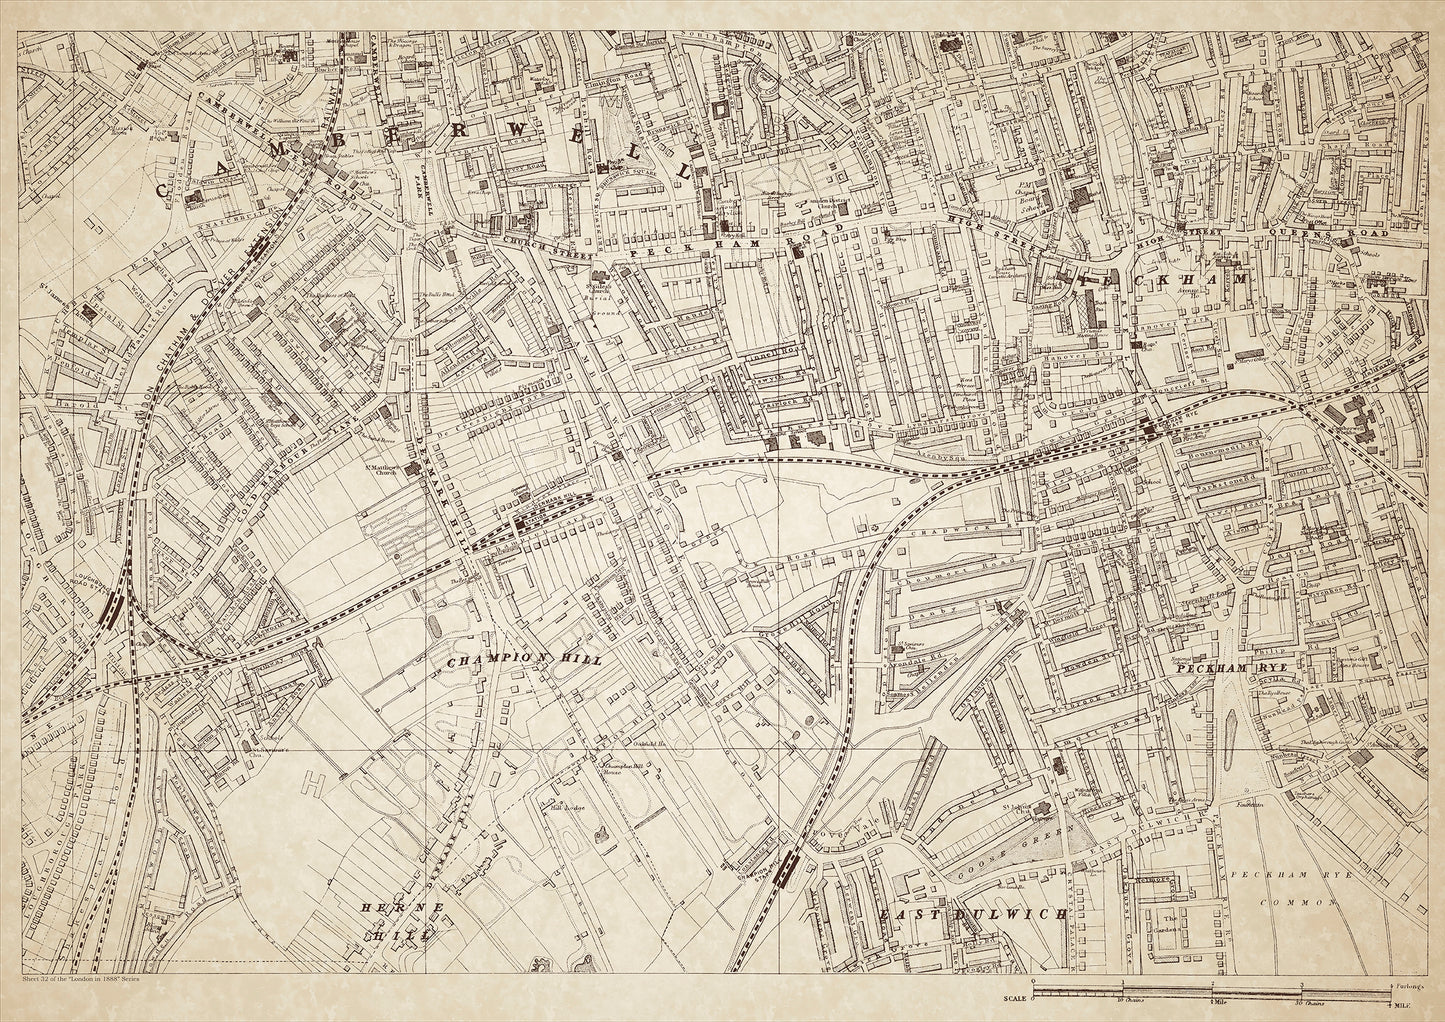 London in 1888 Series - showing Camberwell, Herne Hill, Peckham - sheet 32